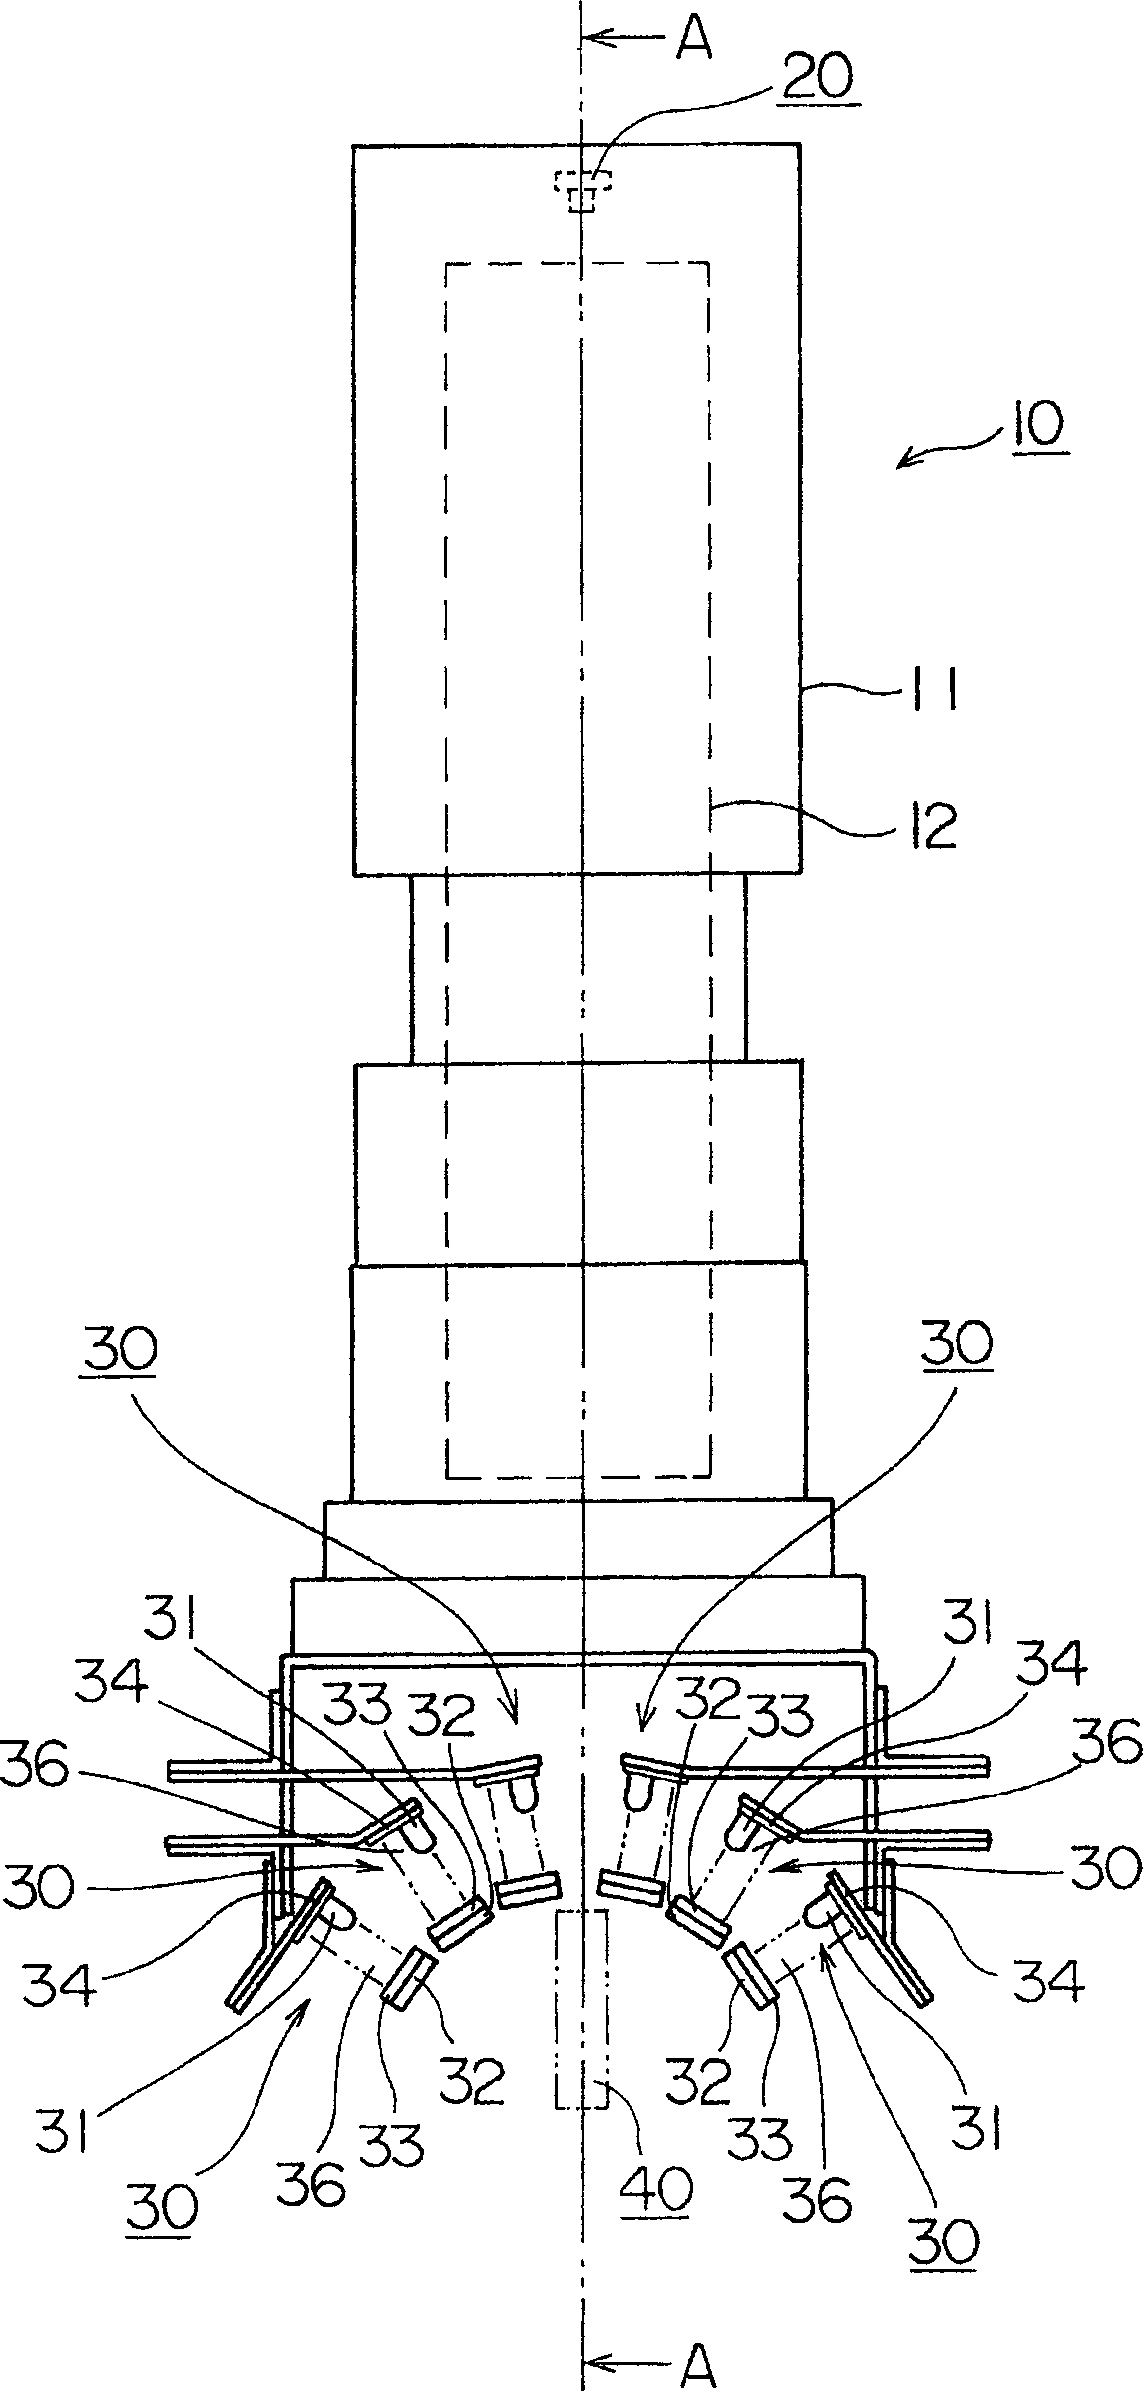 Substrate inspection apparatus